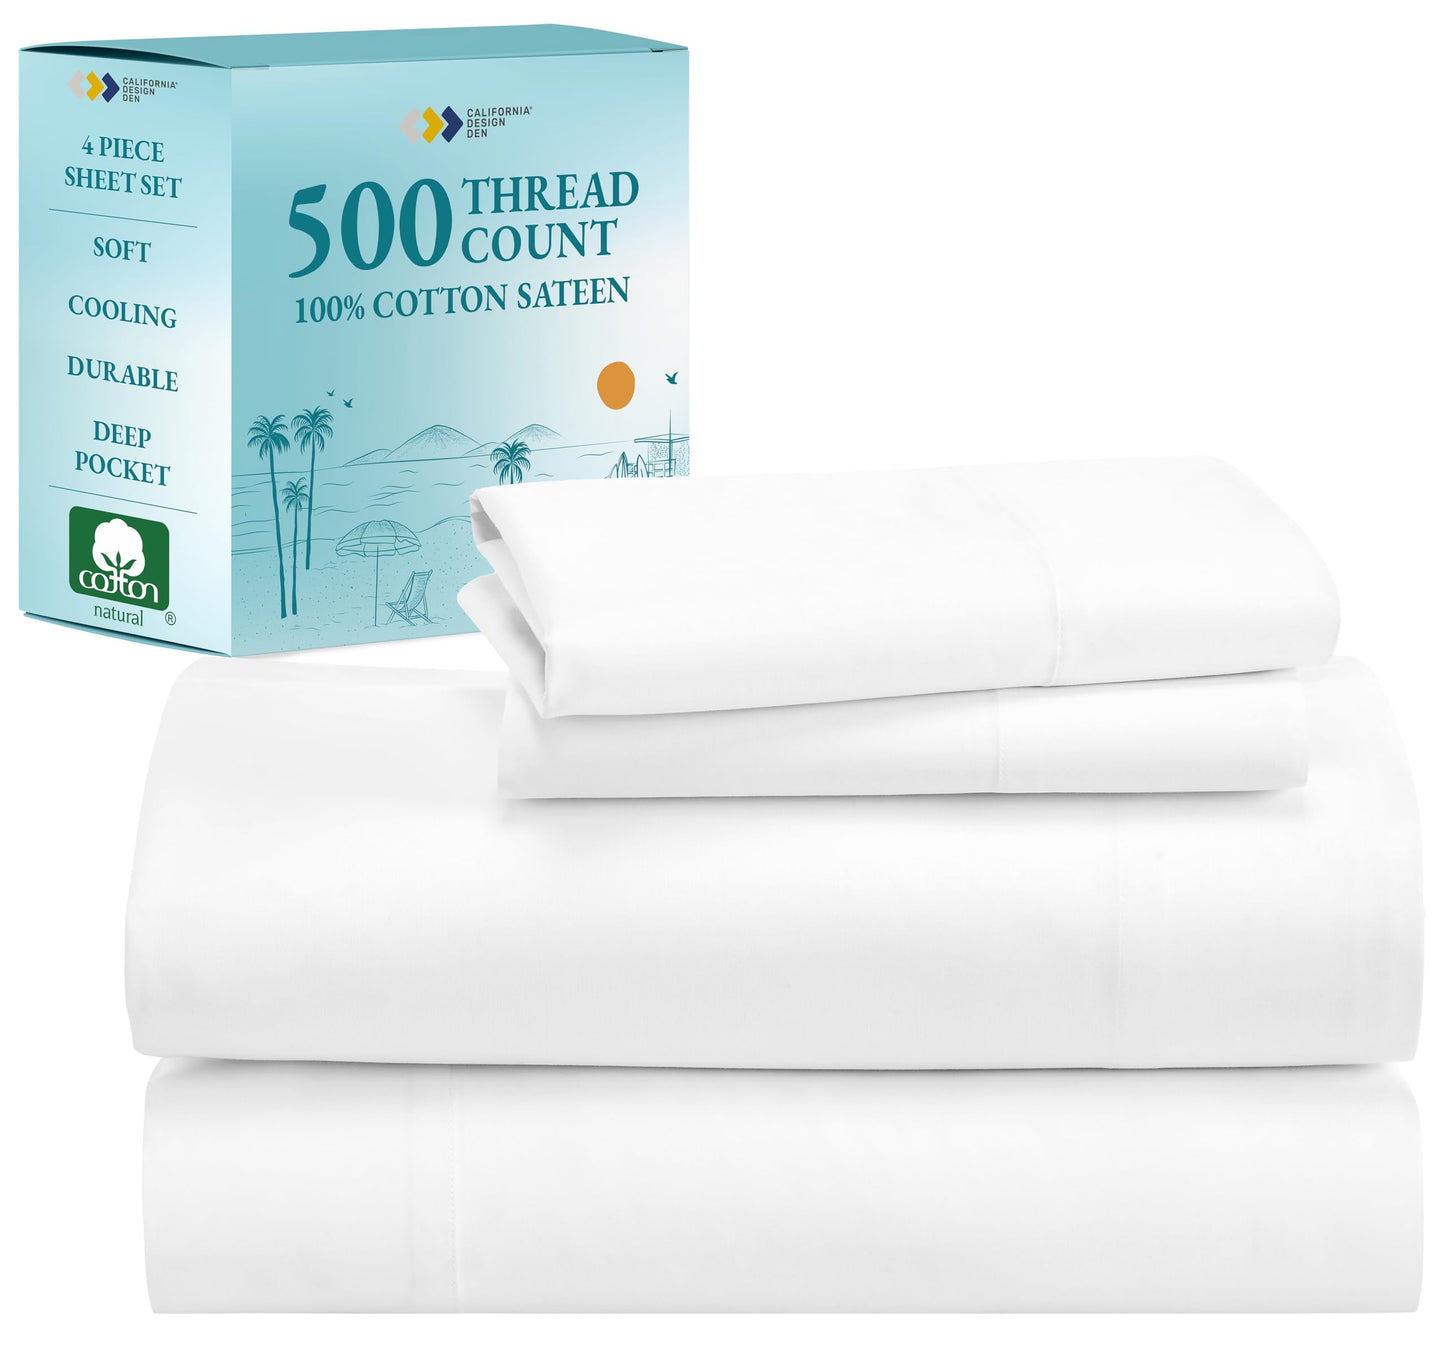 California Design Den 4 Piece California King Size Sheet Set - 100% Cotton 500 Thread Count, Cooling Deep Pocket Bed Sheets with Fitted Elastic Sheet, Extra Soft Luxury Hotel Quality - Pure White